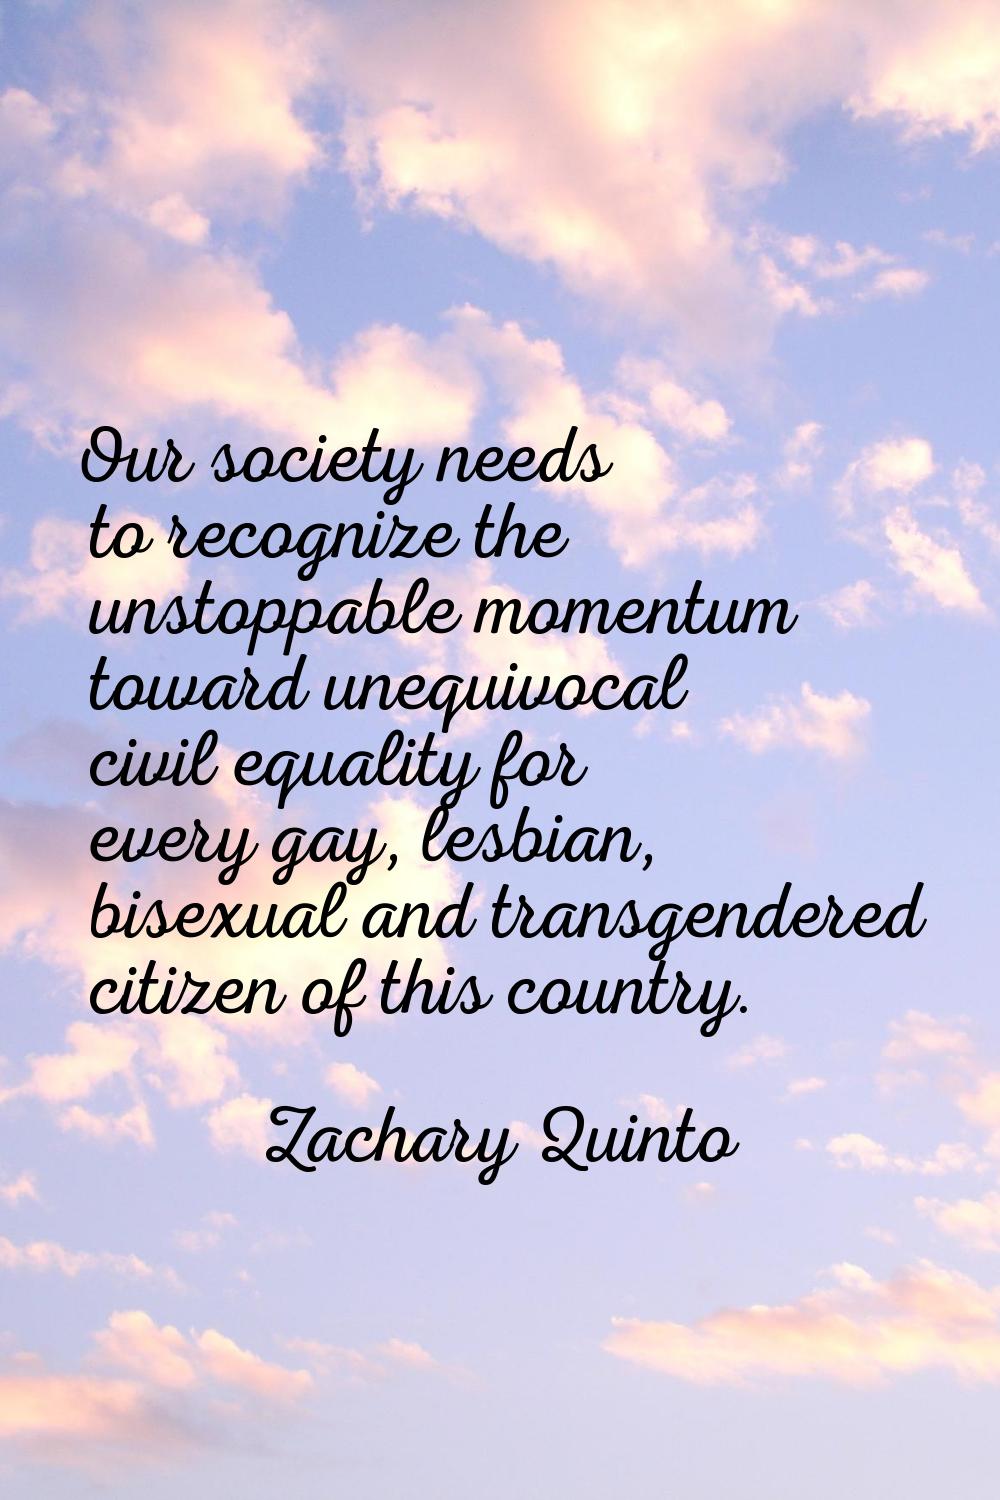 Our society needs to recognize the unstoppable momentum toward unequivocal civil equality for every